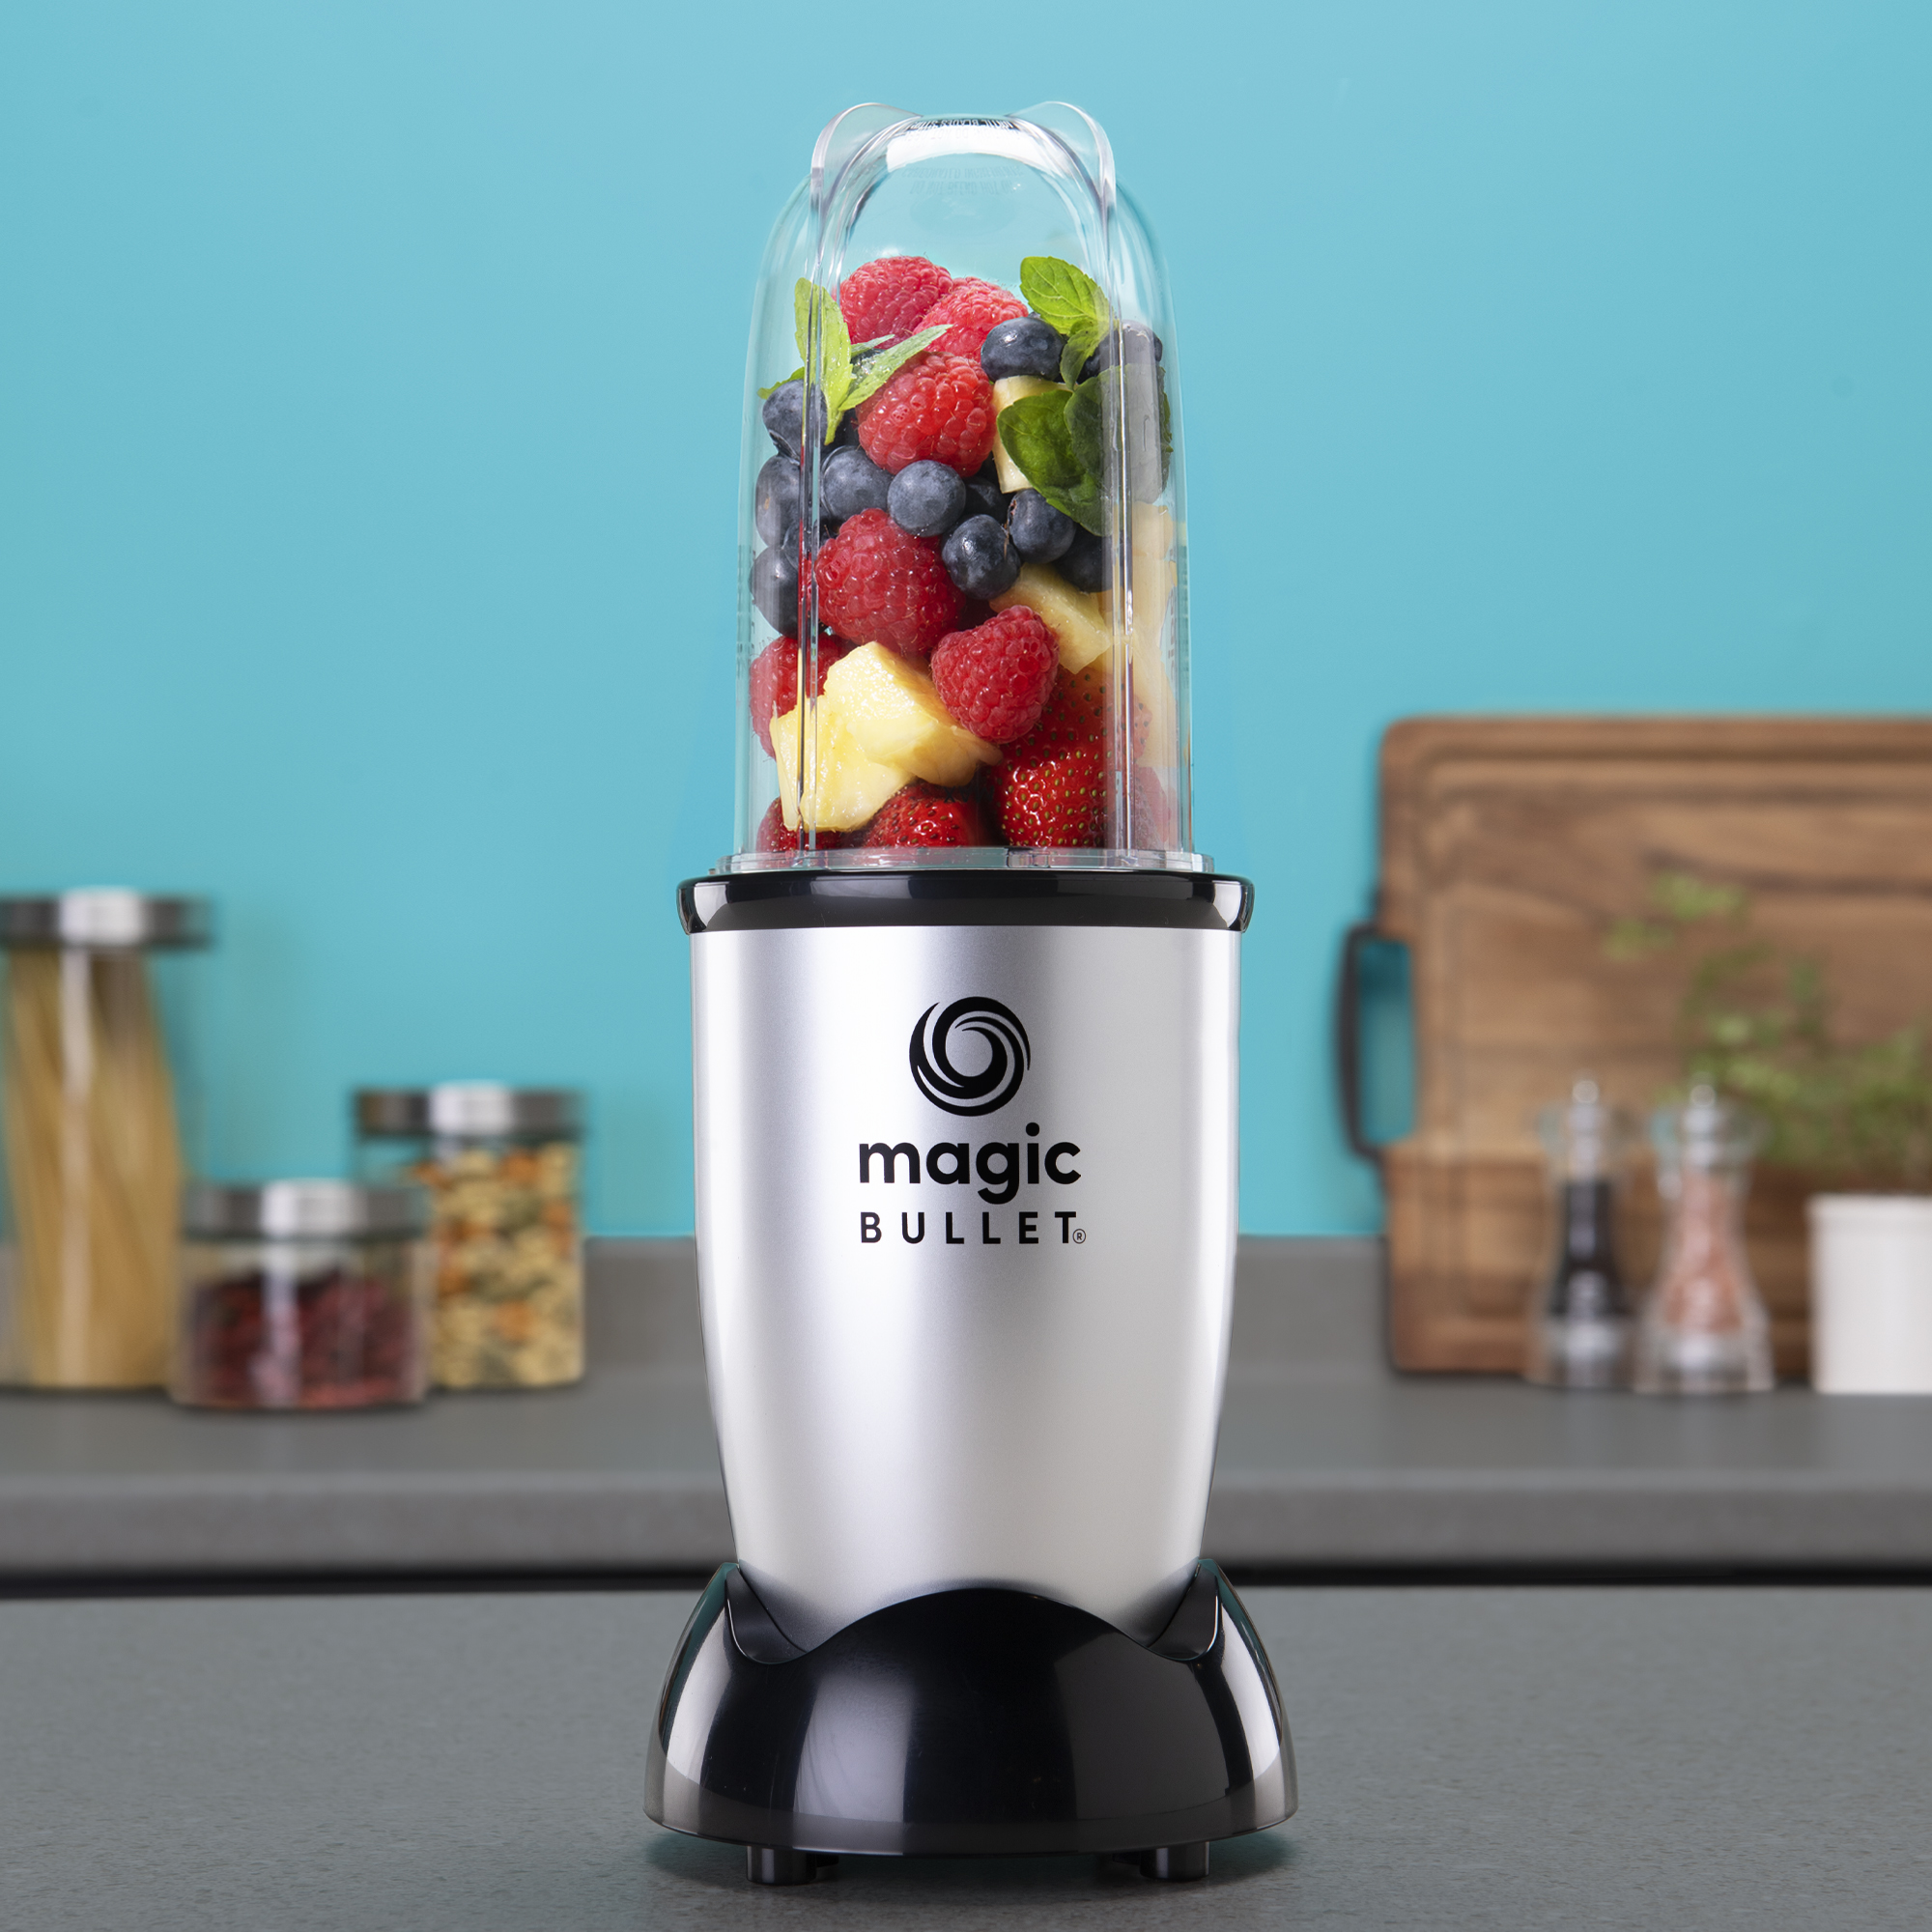 Magic Bullet Essential Personal Blender, 18 oz., Silver. (Condition: New) - image 2 of 6